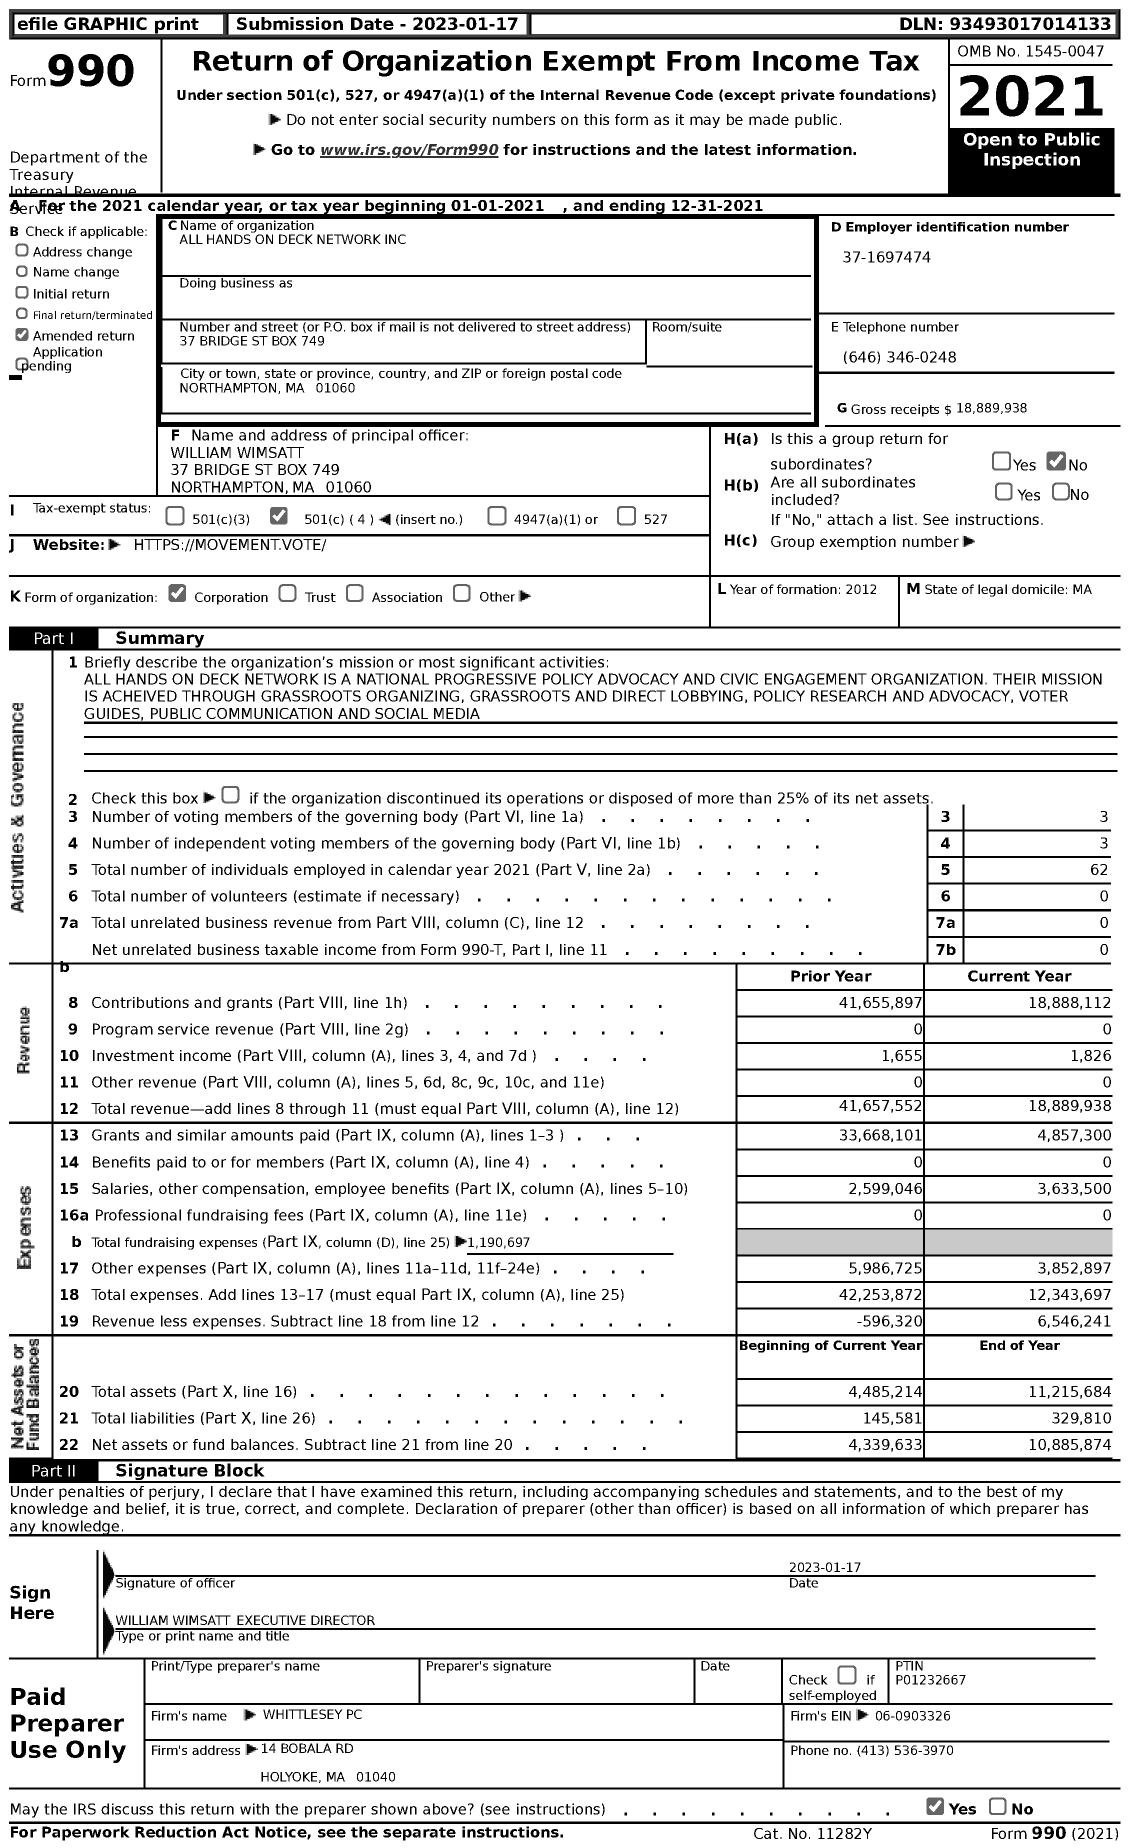 Image of first page of 2021 Form 990 for All Hands on Deck Network